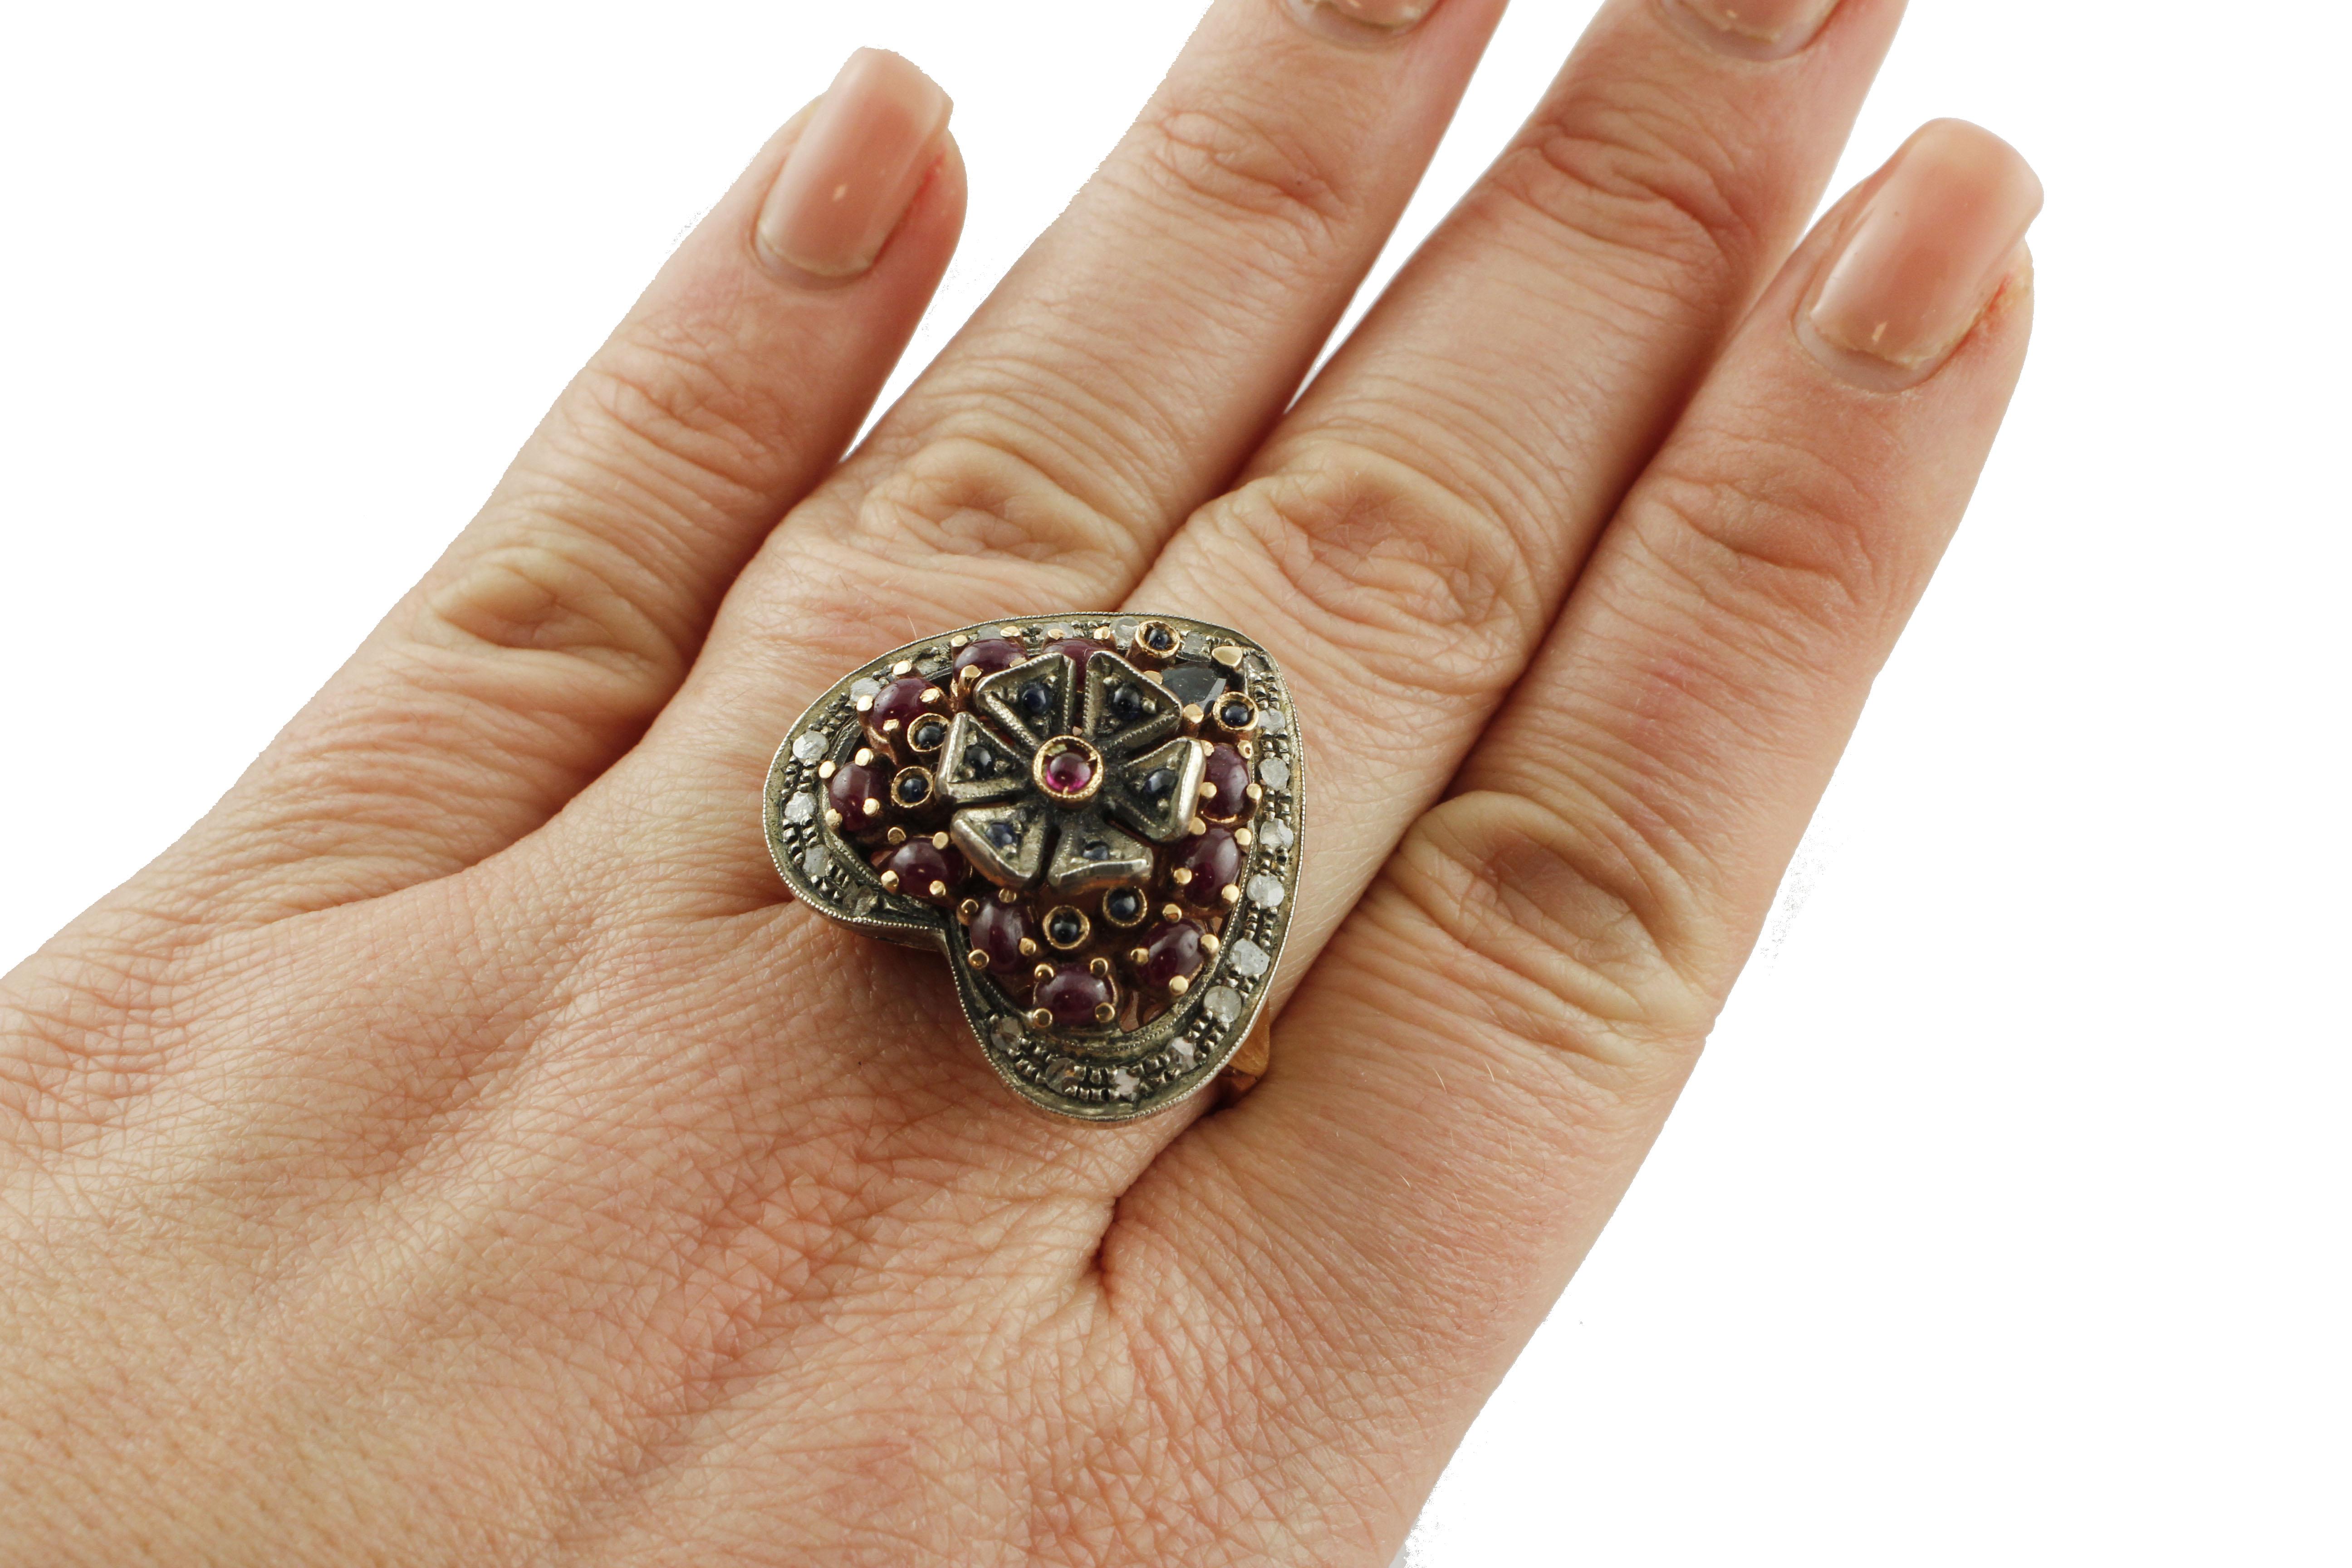 Mixed Cut Diamonds, 3.45 Carat Rubies and Blue Sapphires Heart Shape Rose Gold Silver Ring